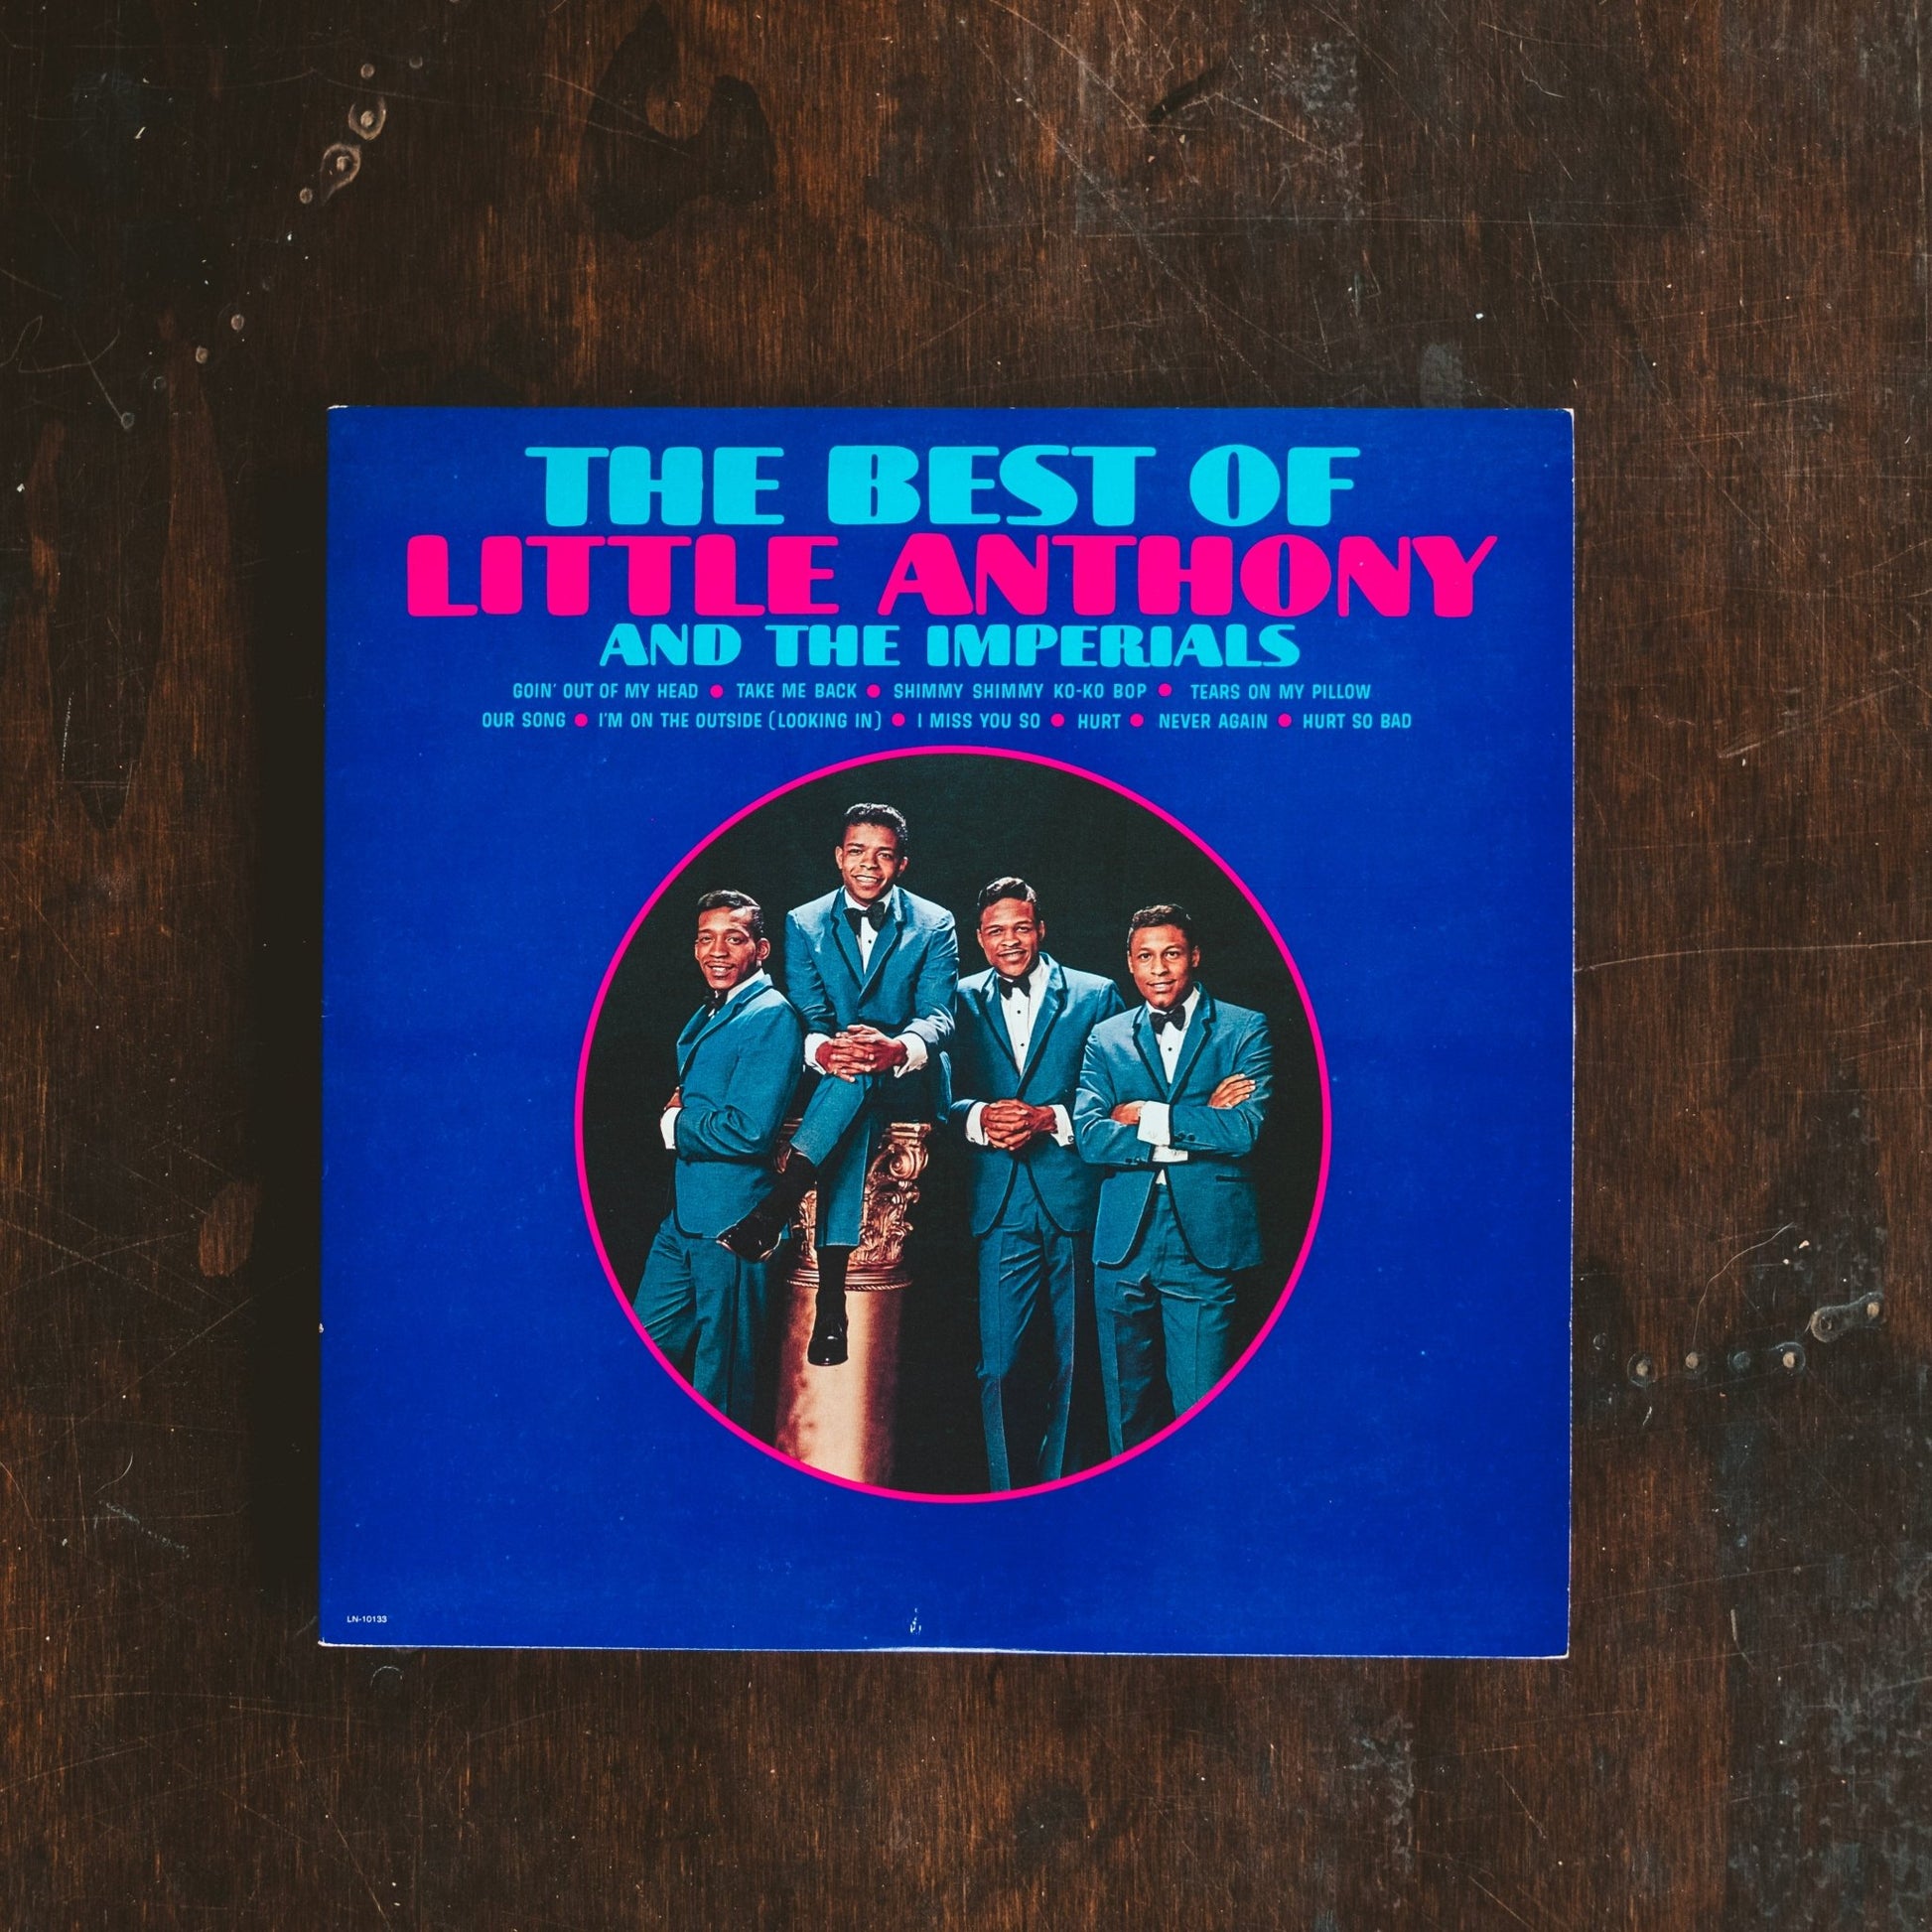 Little Anthony & The Imperials - The Best Of Little Anthony & The Imperials (Pre-Loved) - NM - Little Anthony & The Imperials - The Best Of Little Anthony & The Imperials - Yellow Racket Records